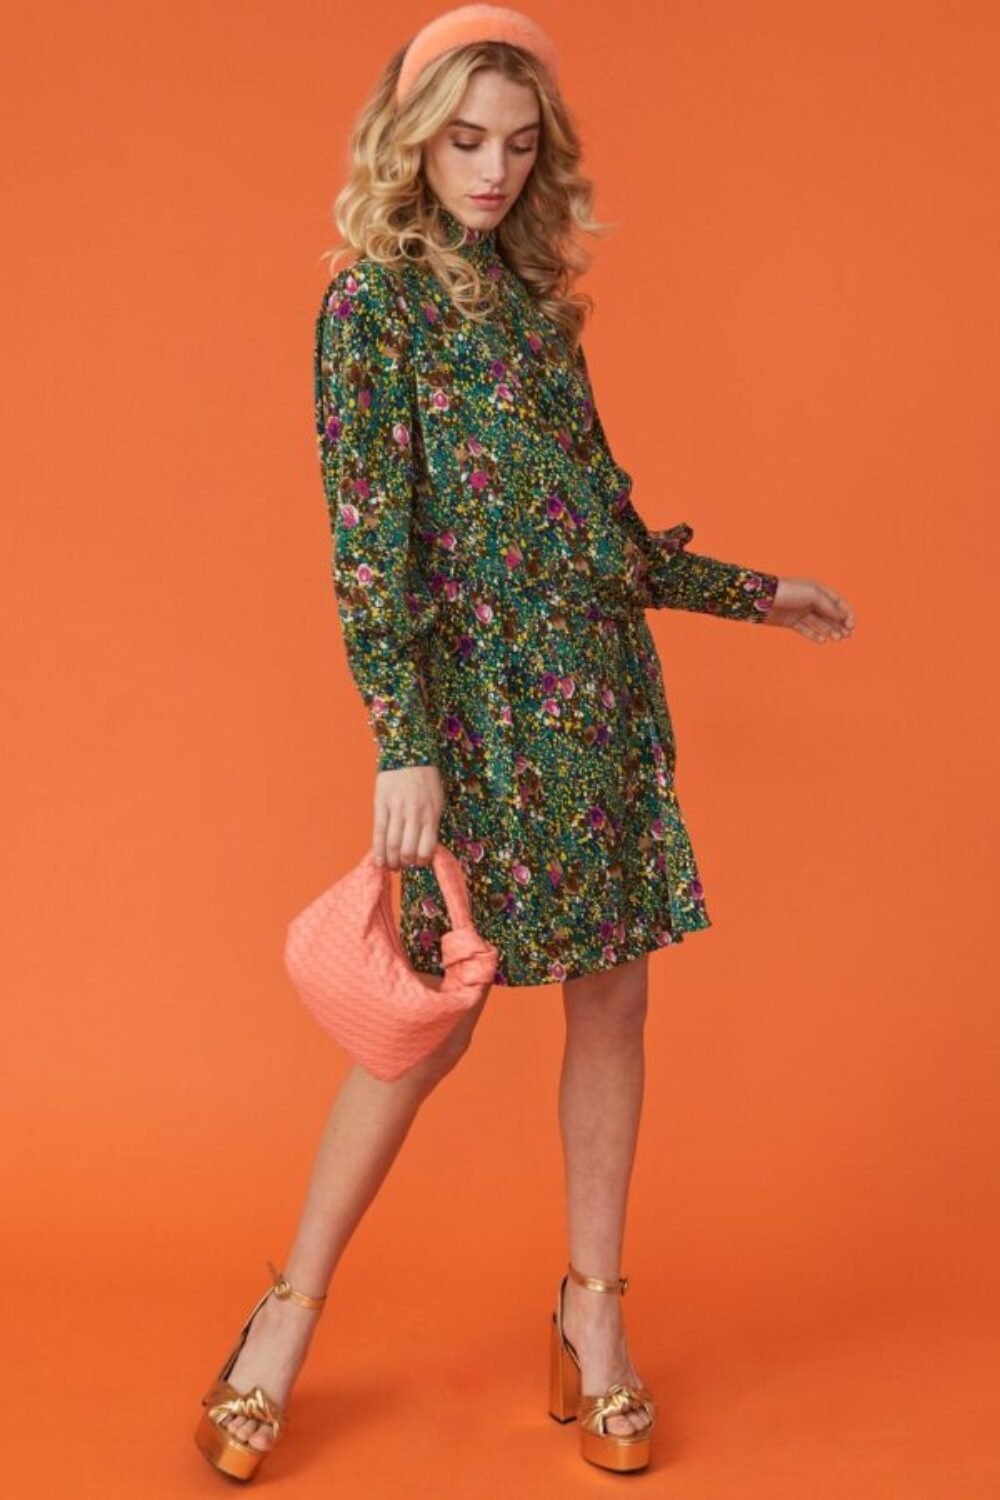 Shop Lux Green Floral High Neck Dress with Long Sleeves and women's luxury and designer clothes at www.lux-apparel.co.uk